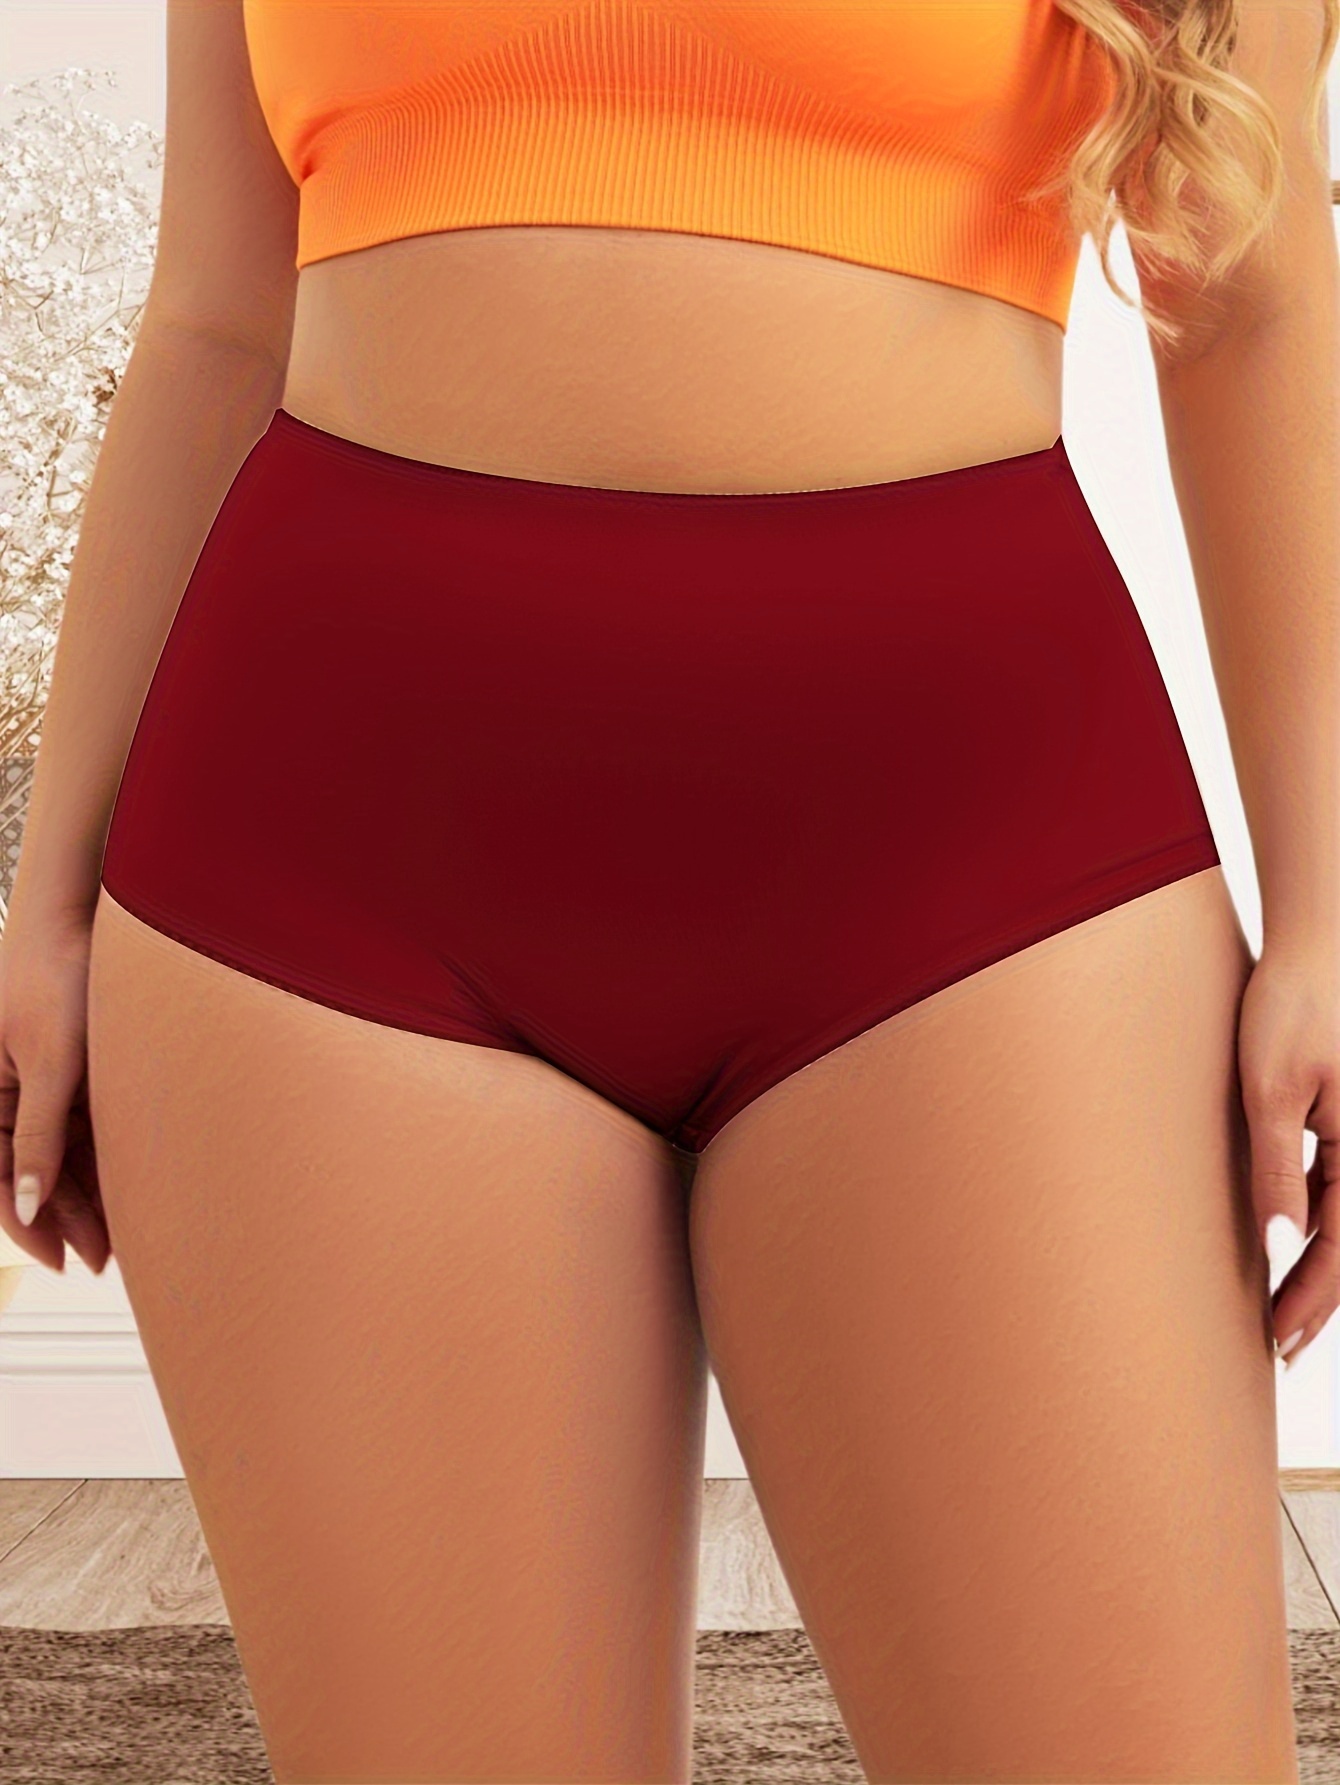 Women Plus Size Panties Underwear High Waist Tummy Control Seamless Basics  Briefs Underpants for Middle-Aged Ladies